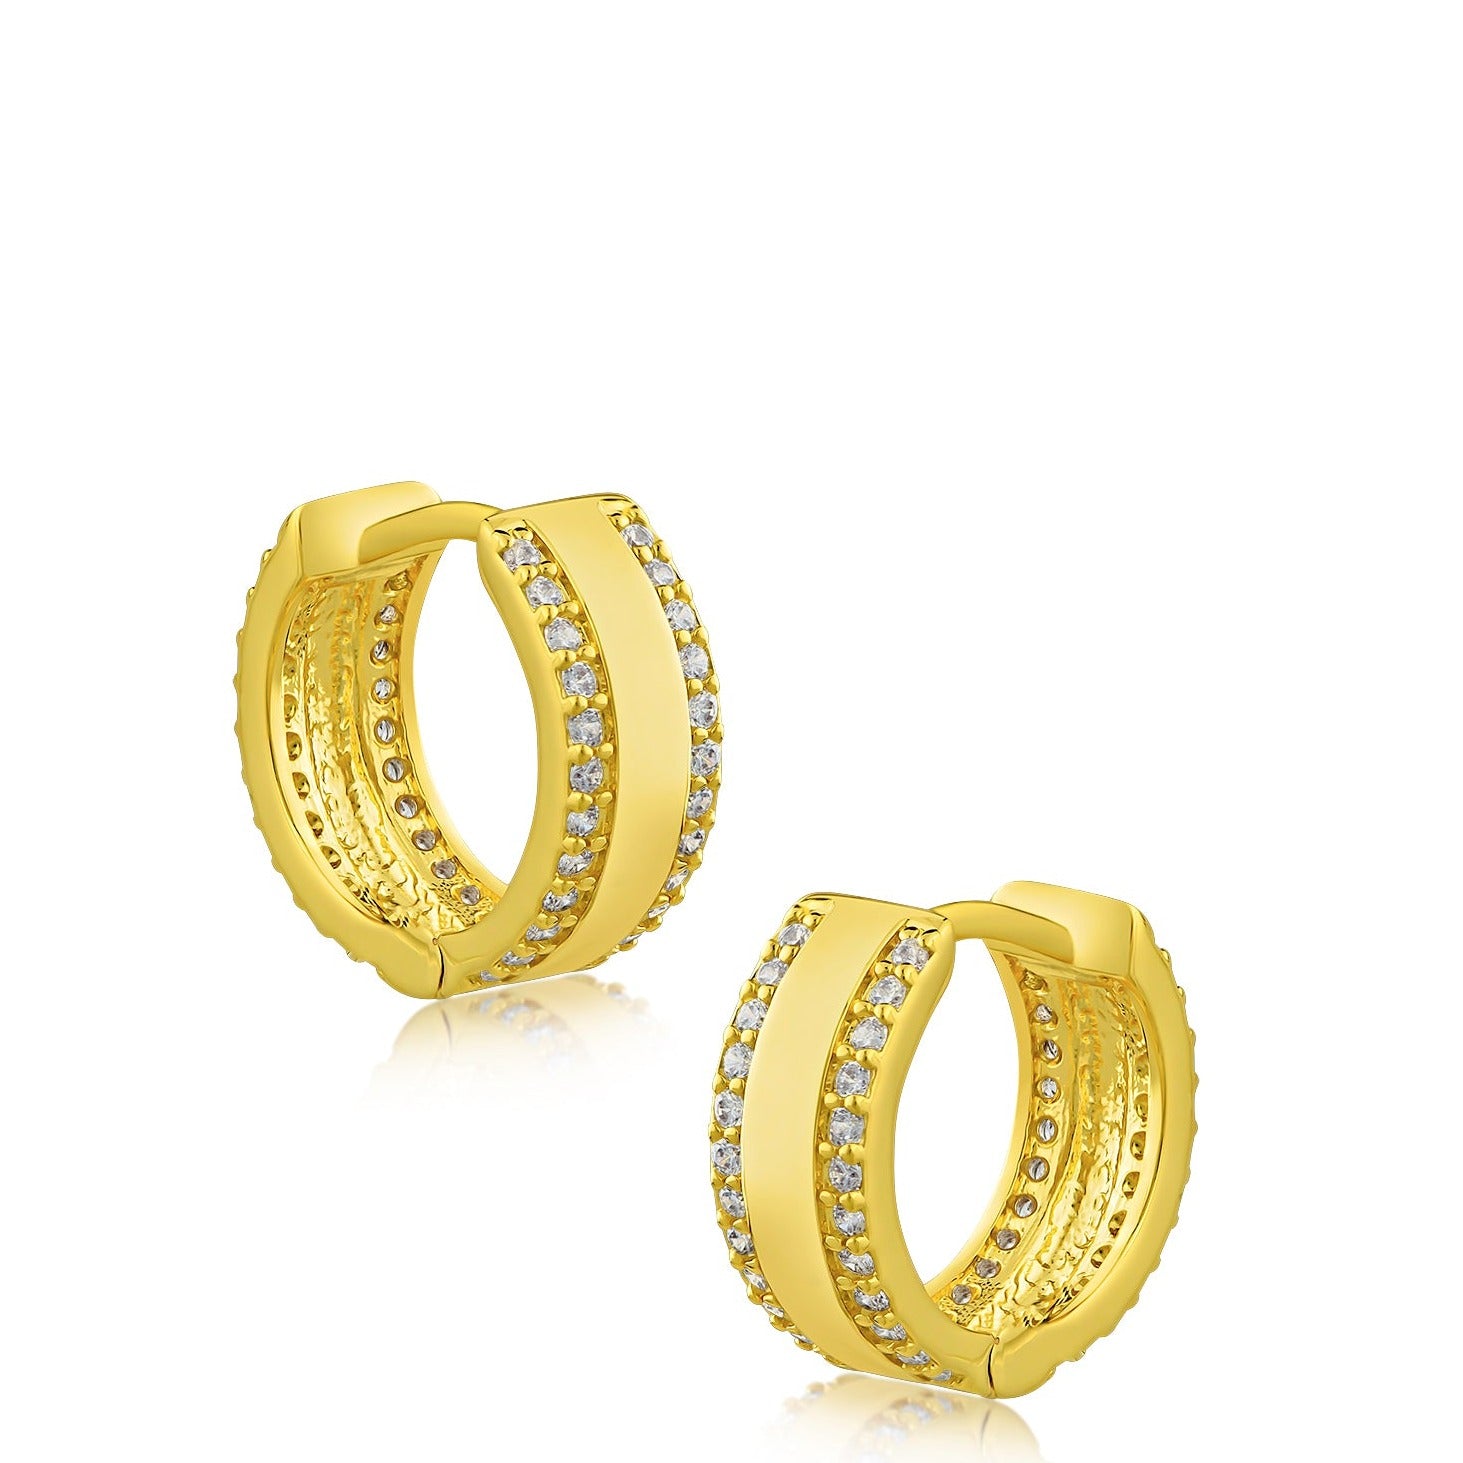 ASOS DESIGN hoop earrings with babygirl gothic font in gold tone | ASOS